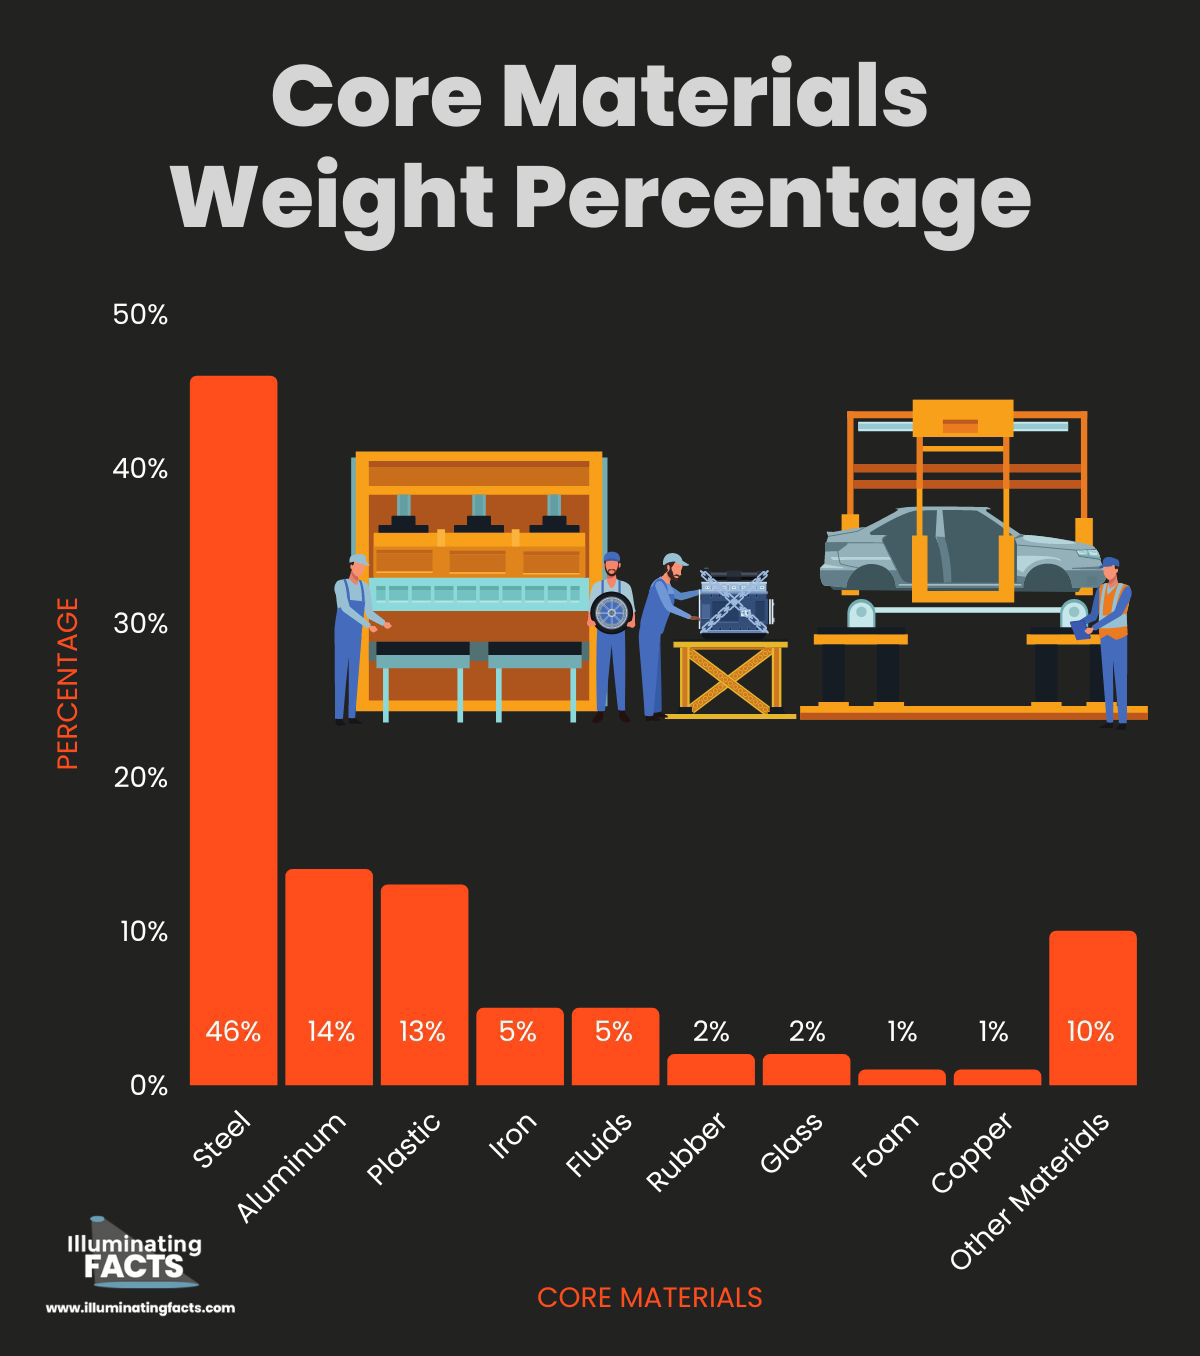 Core Materials Weight Percentage